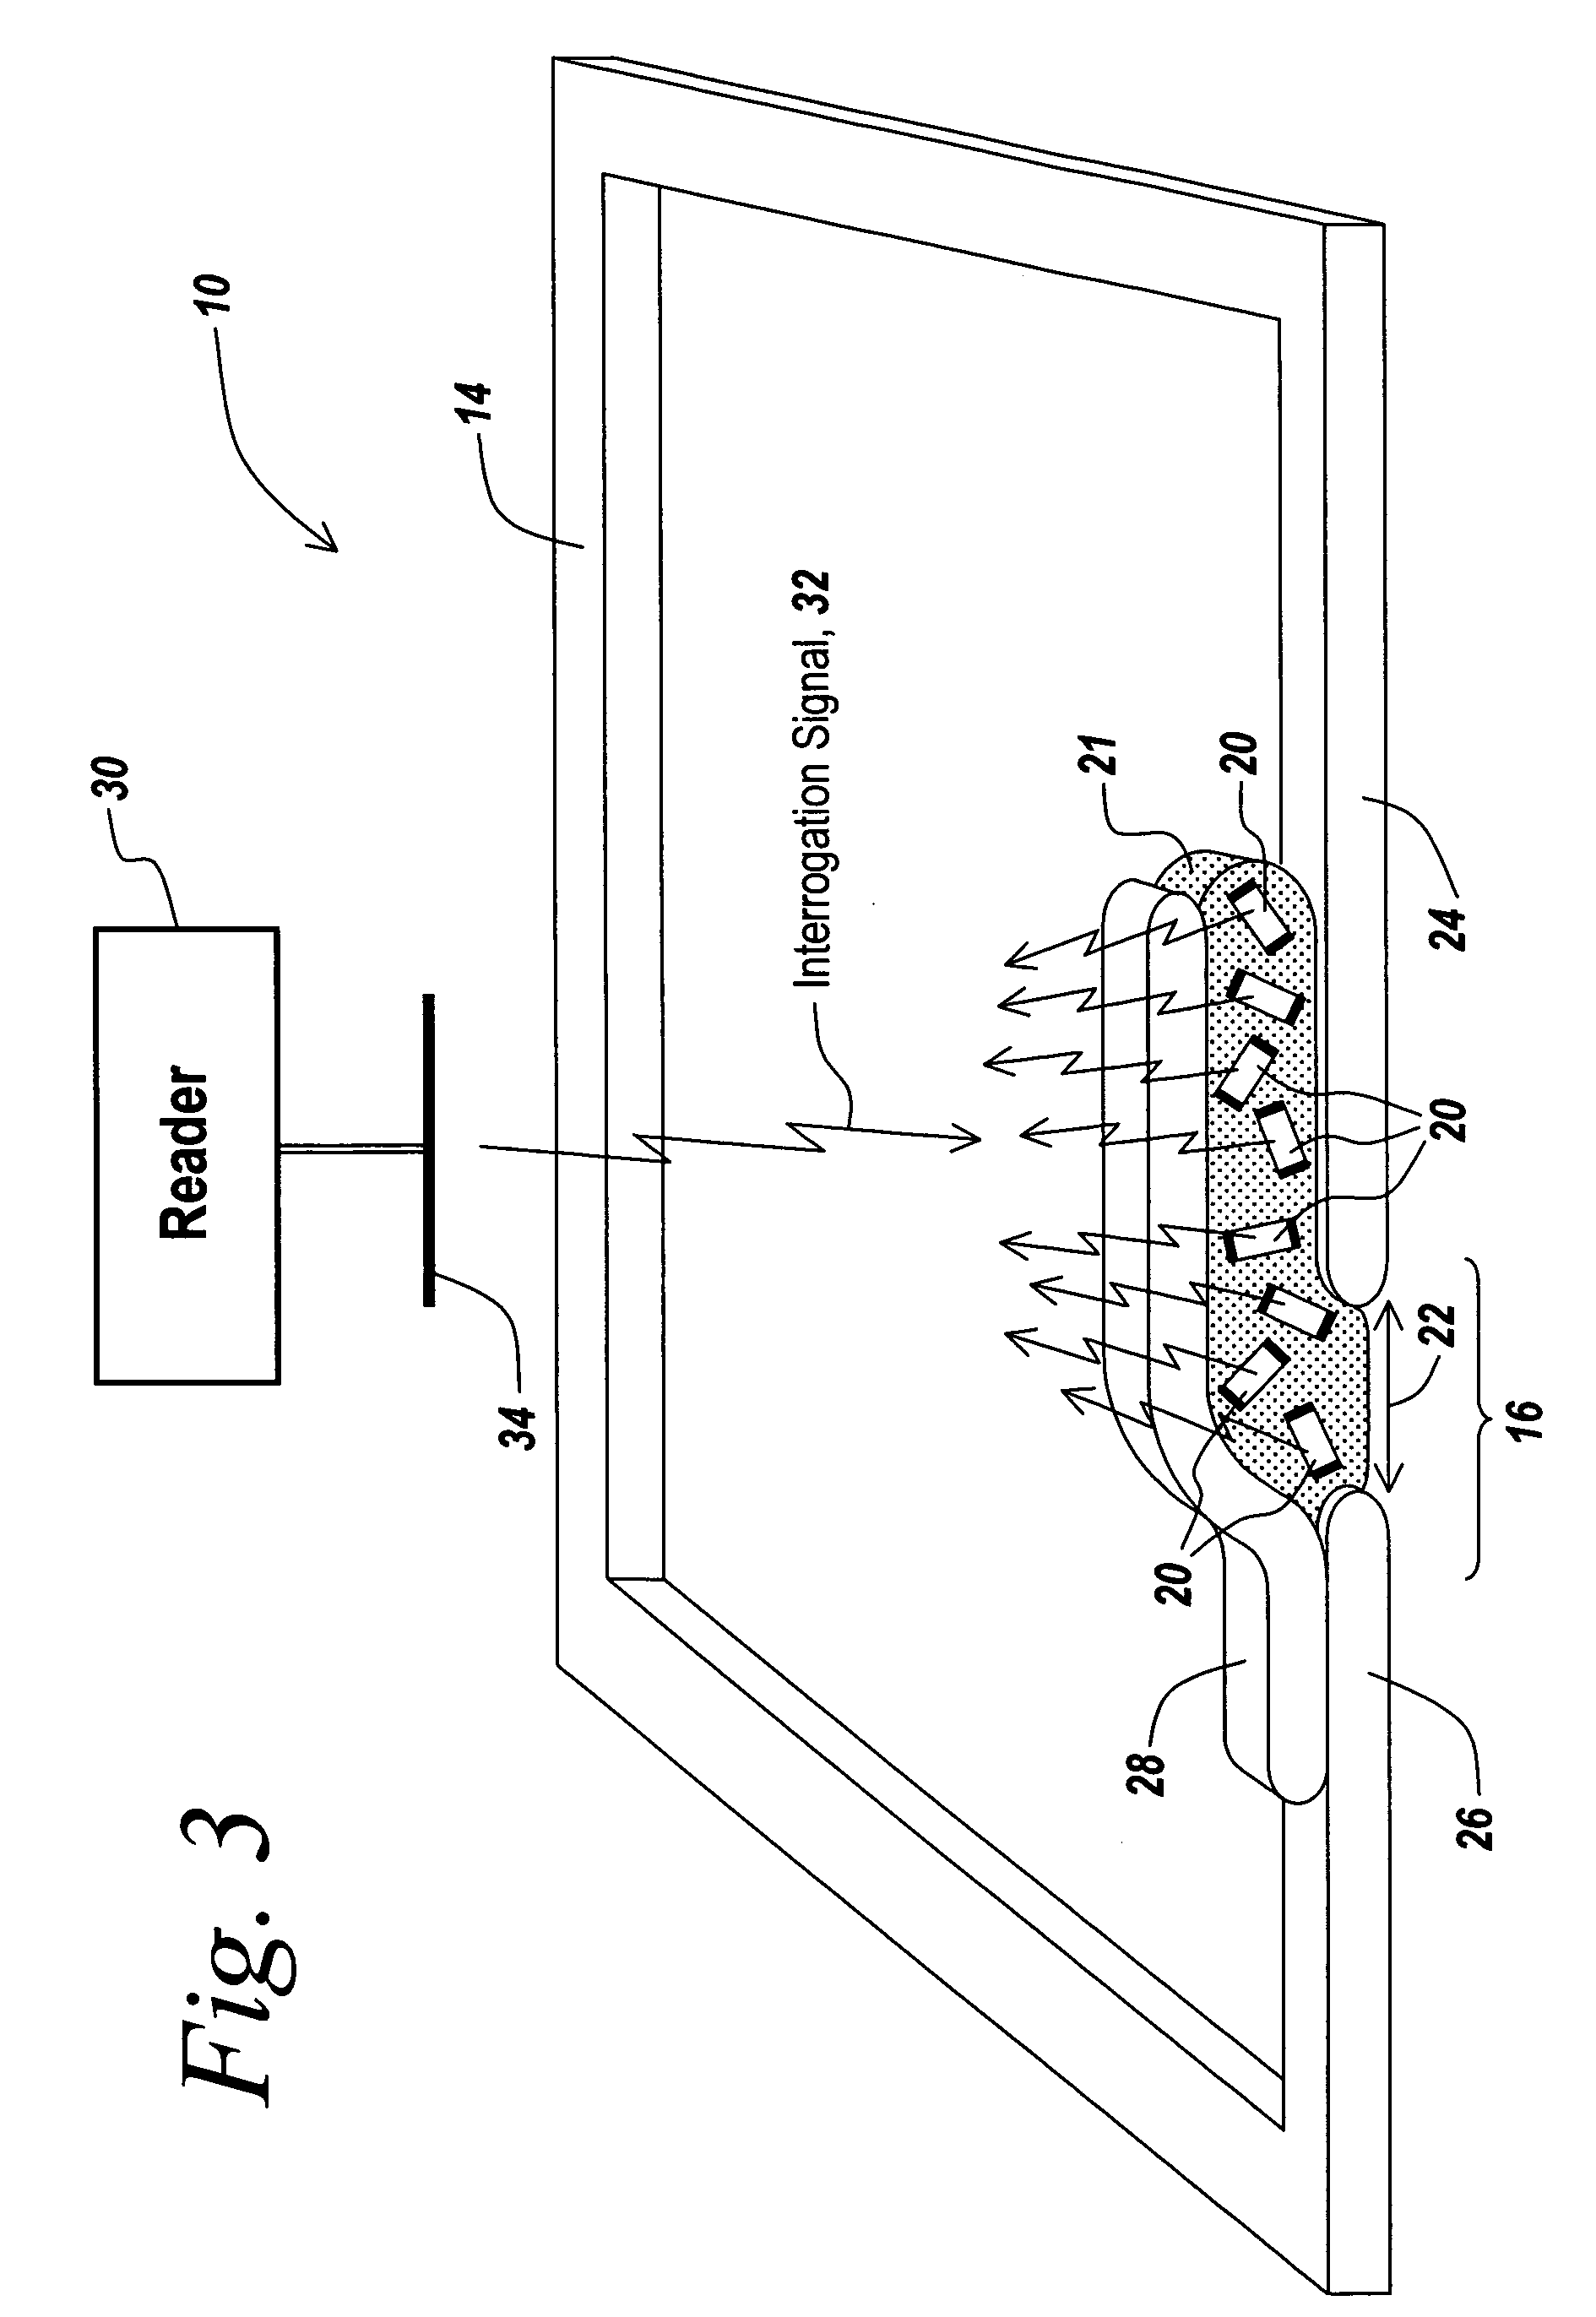 RFID tag incorporating at least two integrated circuits